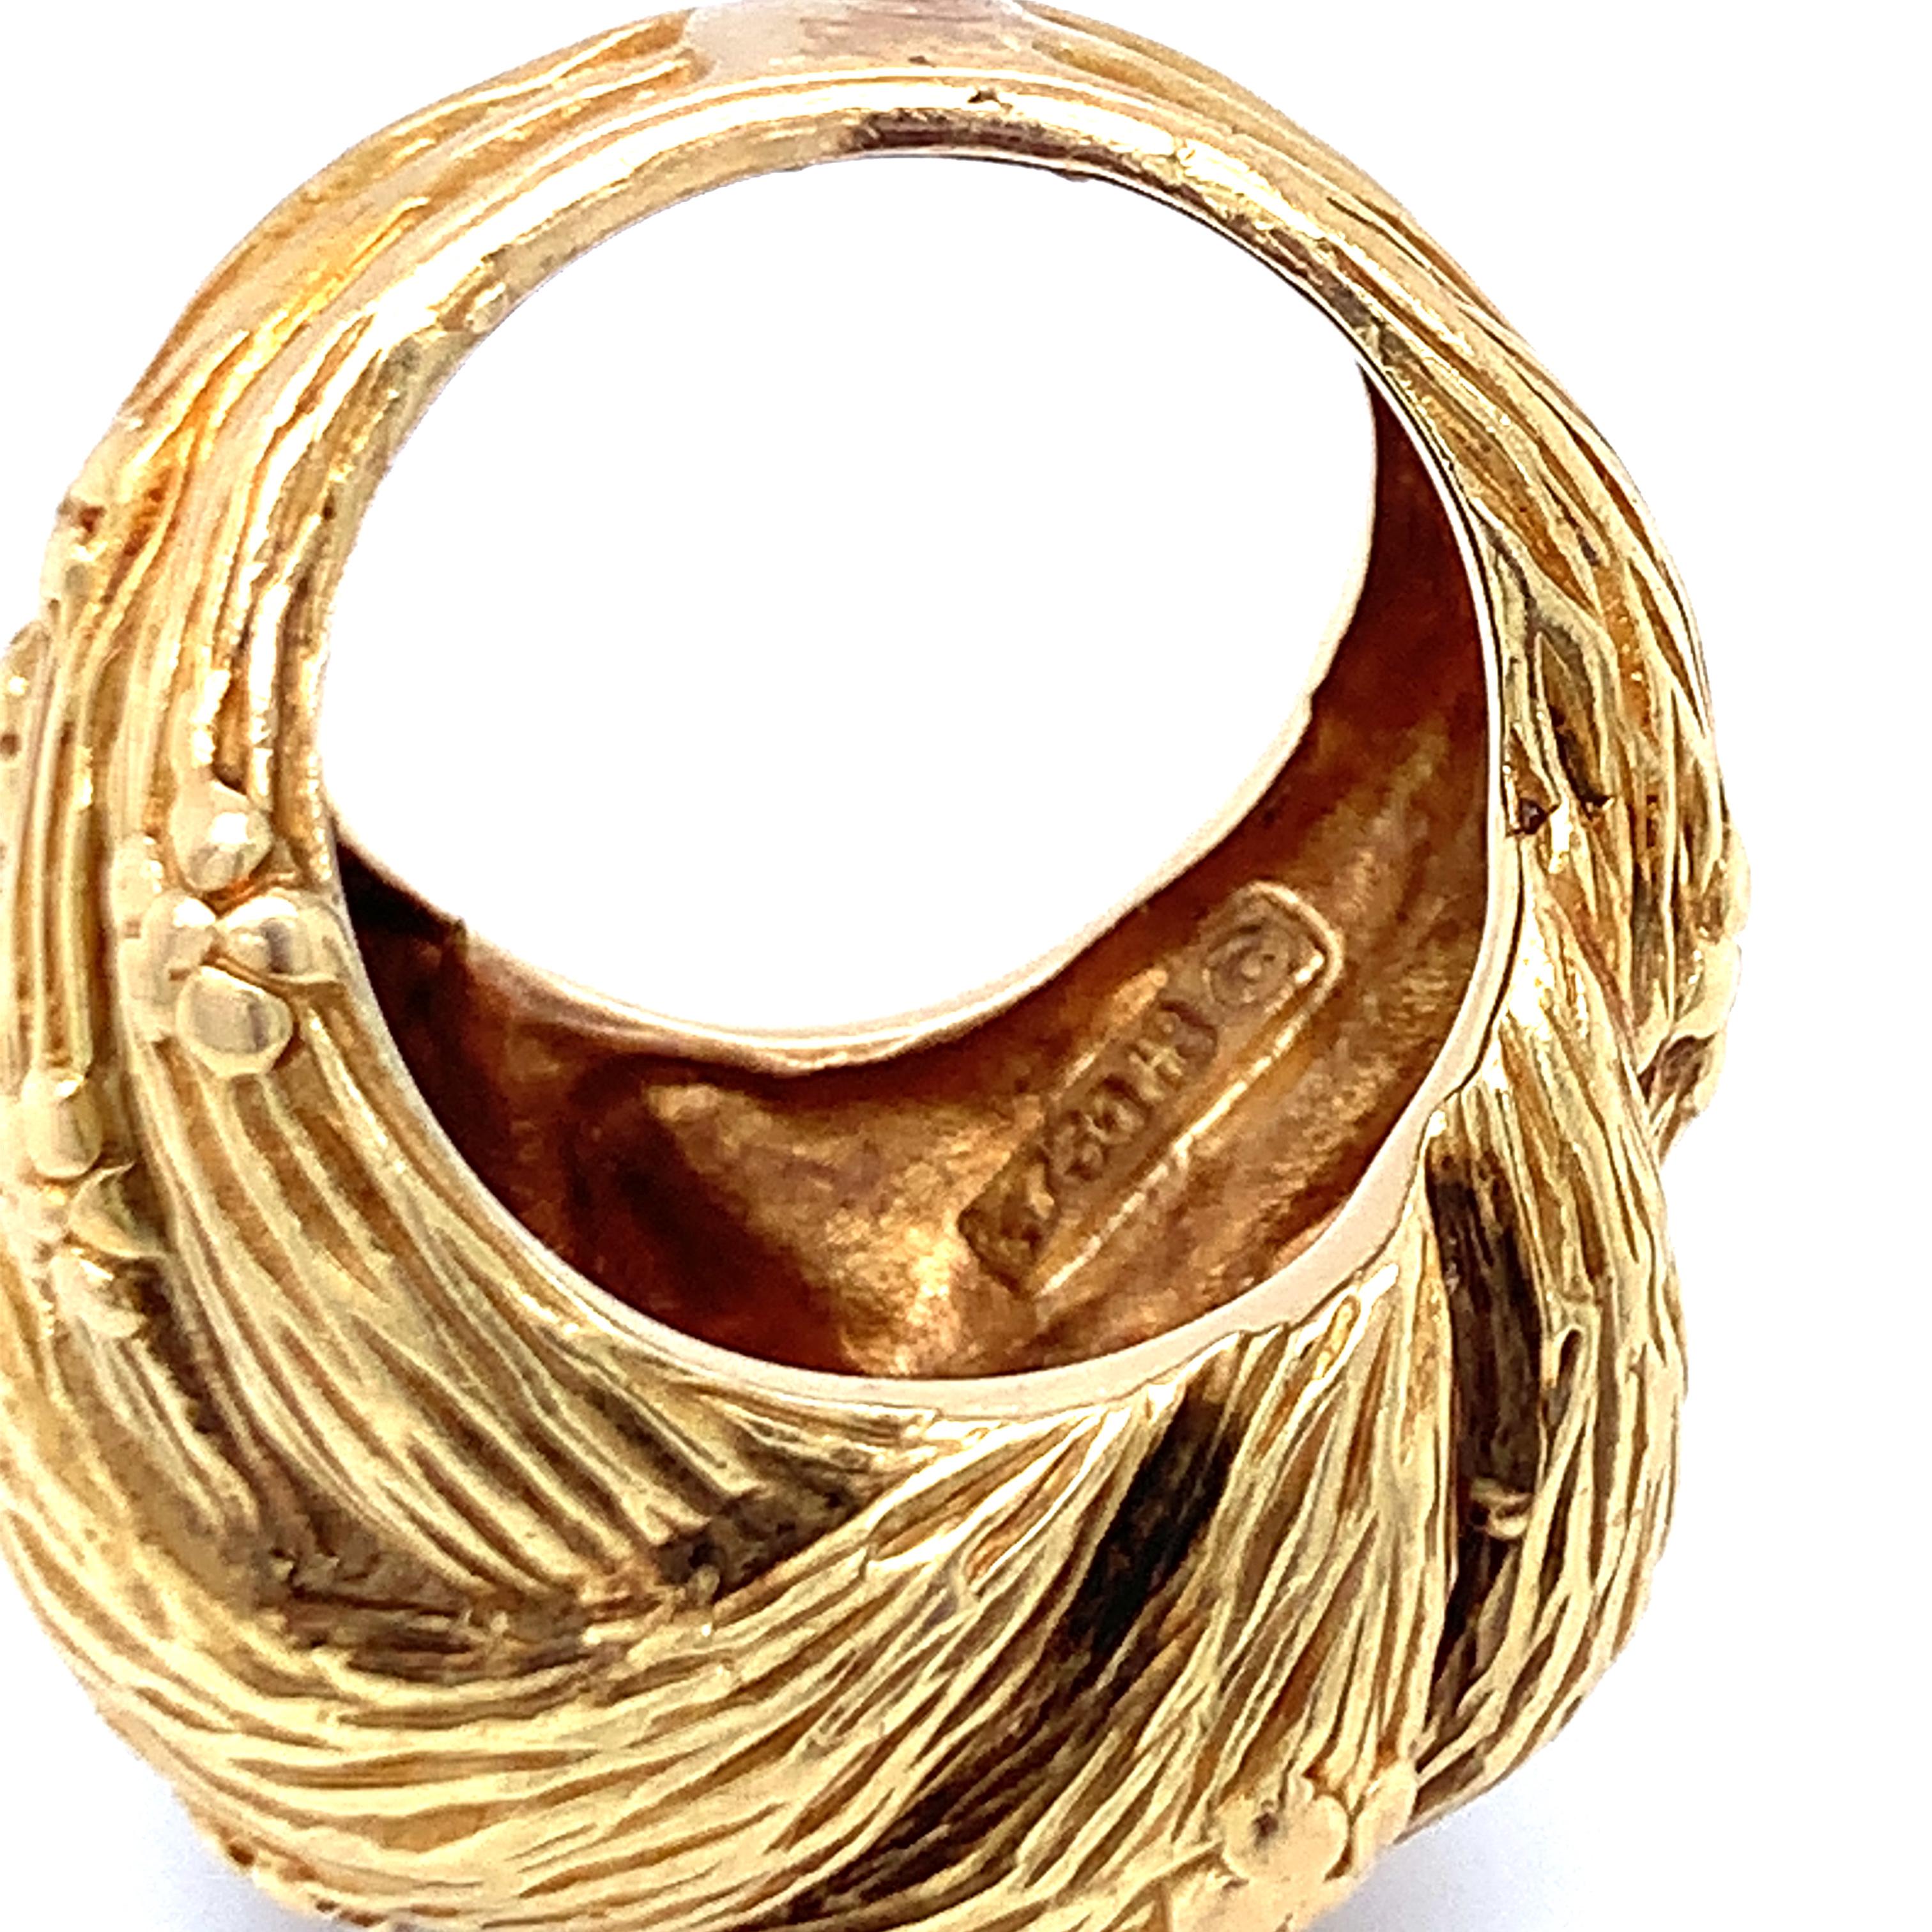 Textured Golden Knot Ring by Hammerman Brothers For Sale 1